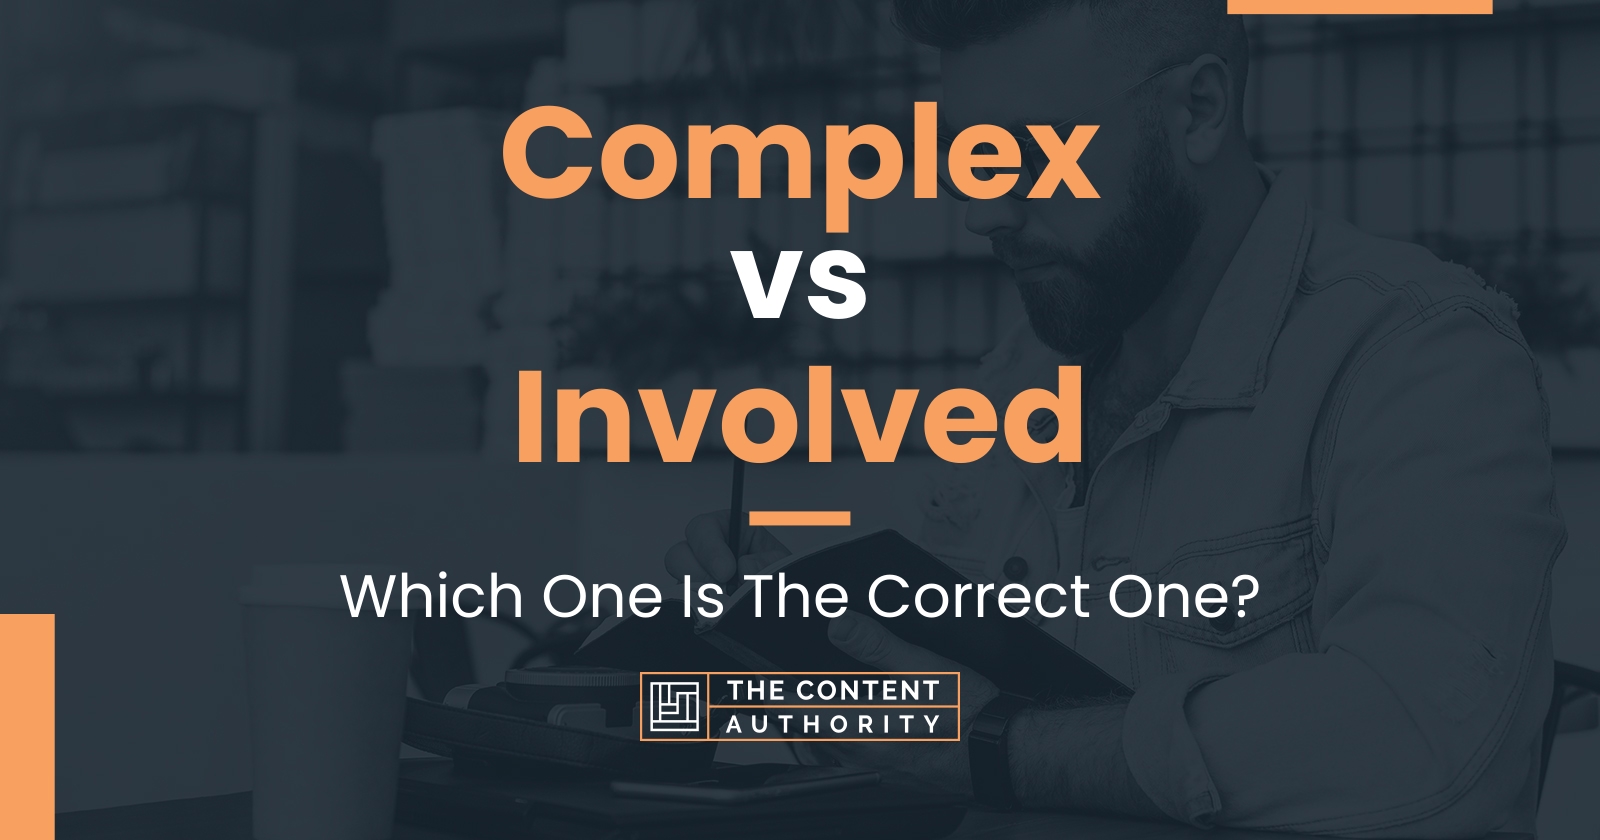 Complex vs Involved: Which One Is The Correct One?